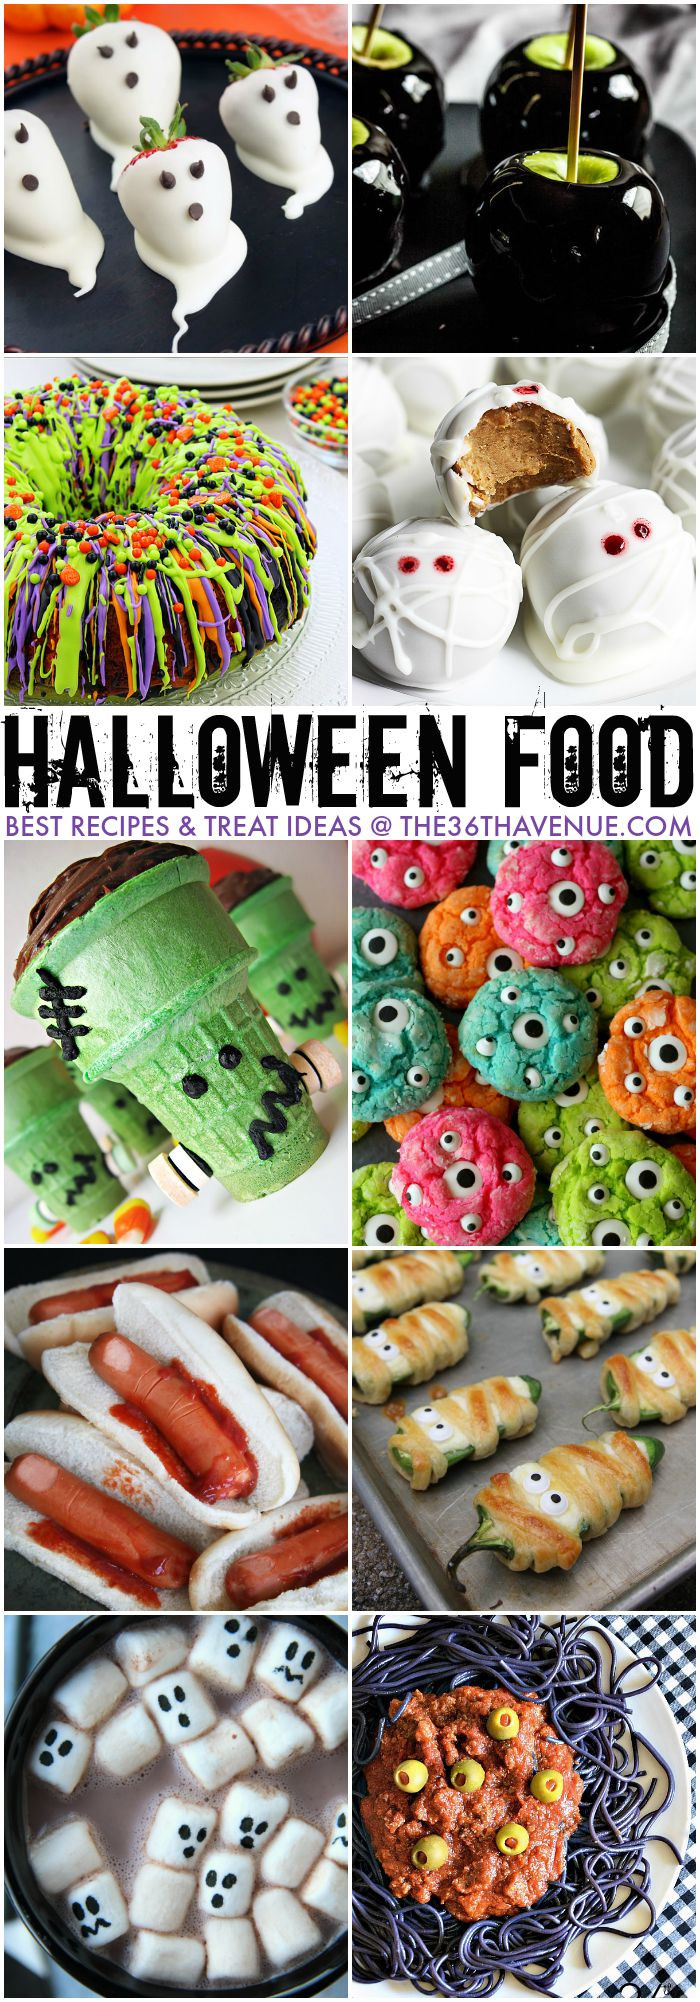 Halloween Party Treat Ideas
 Halloween Best Treats and Recipes The 36th AVENUE